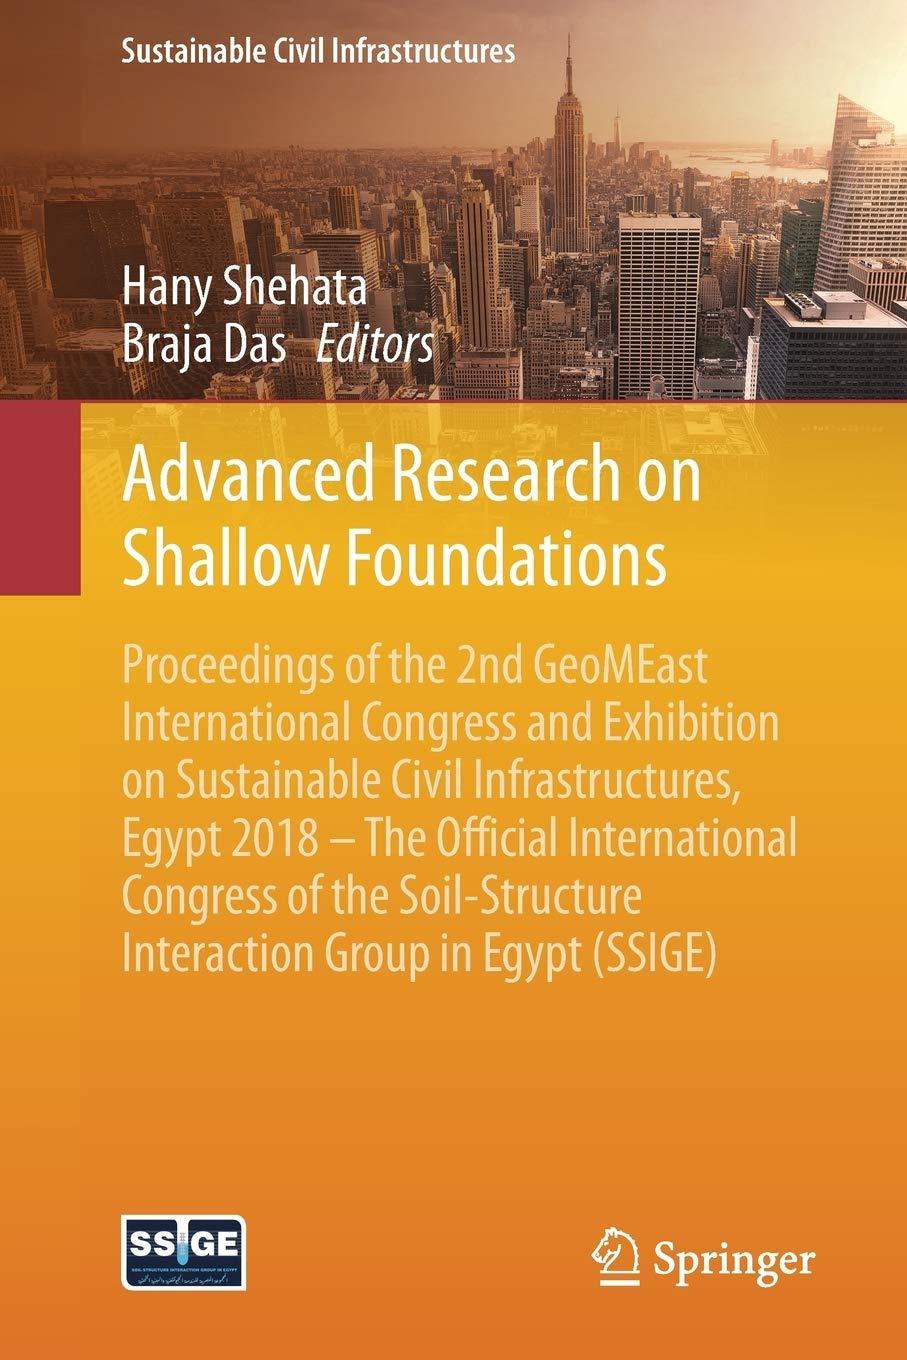 advanced research on shallow foundations proceedings of the 2nd geomeast international congress and